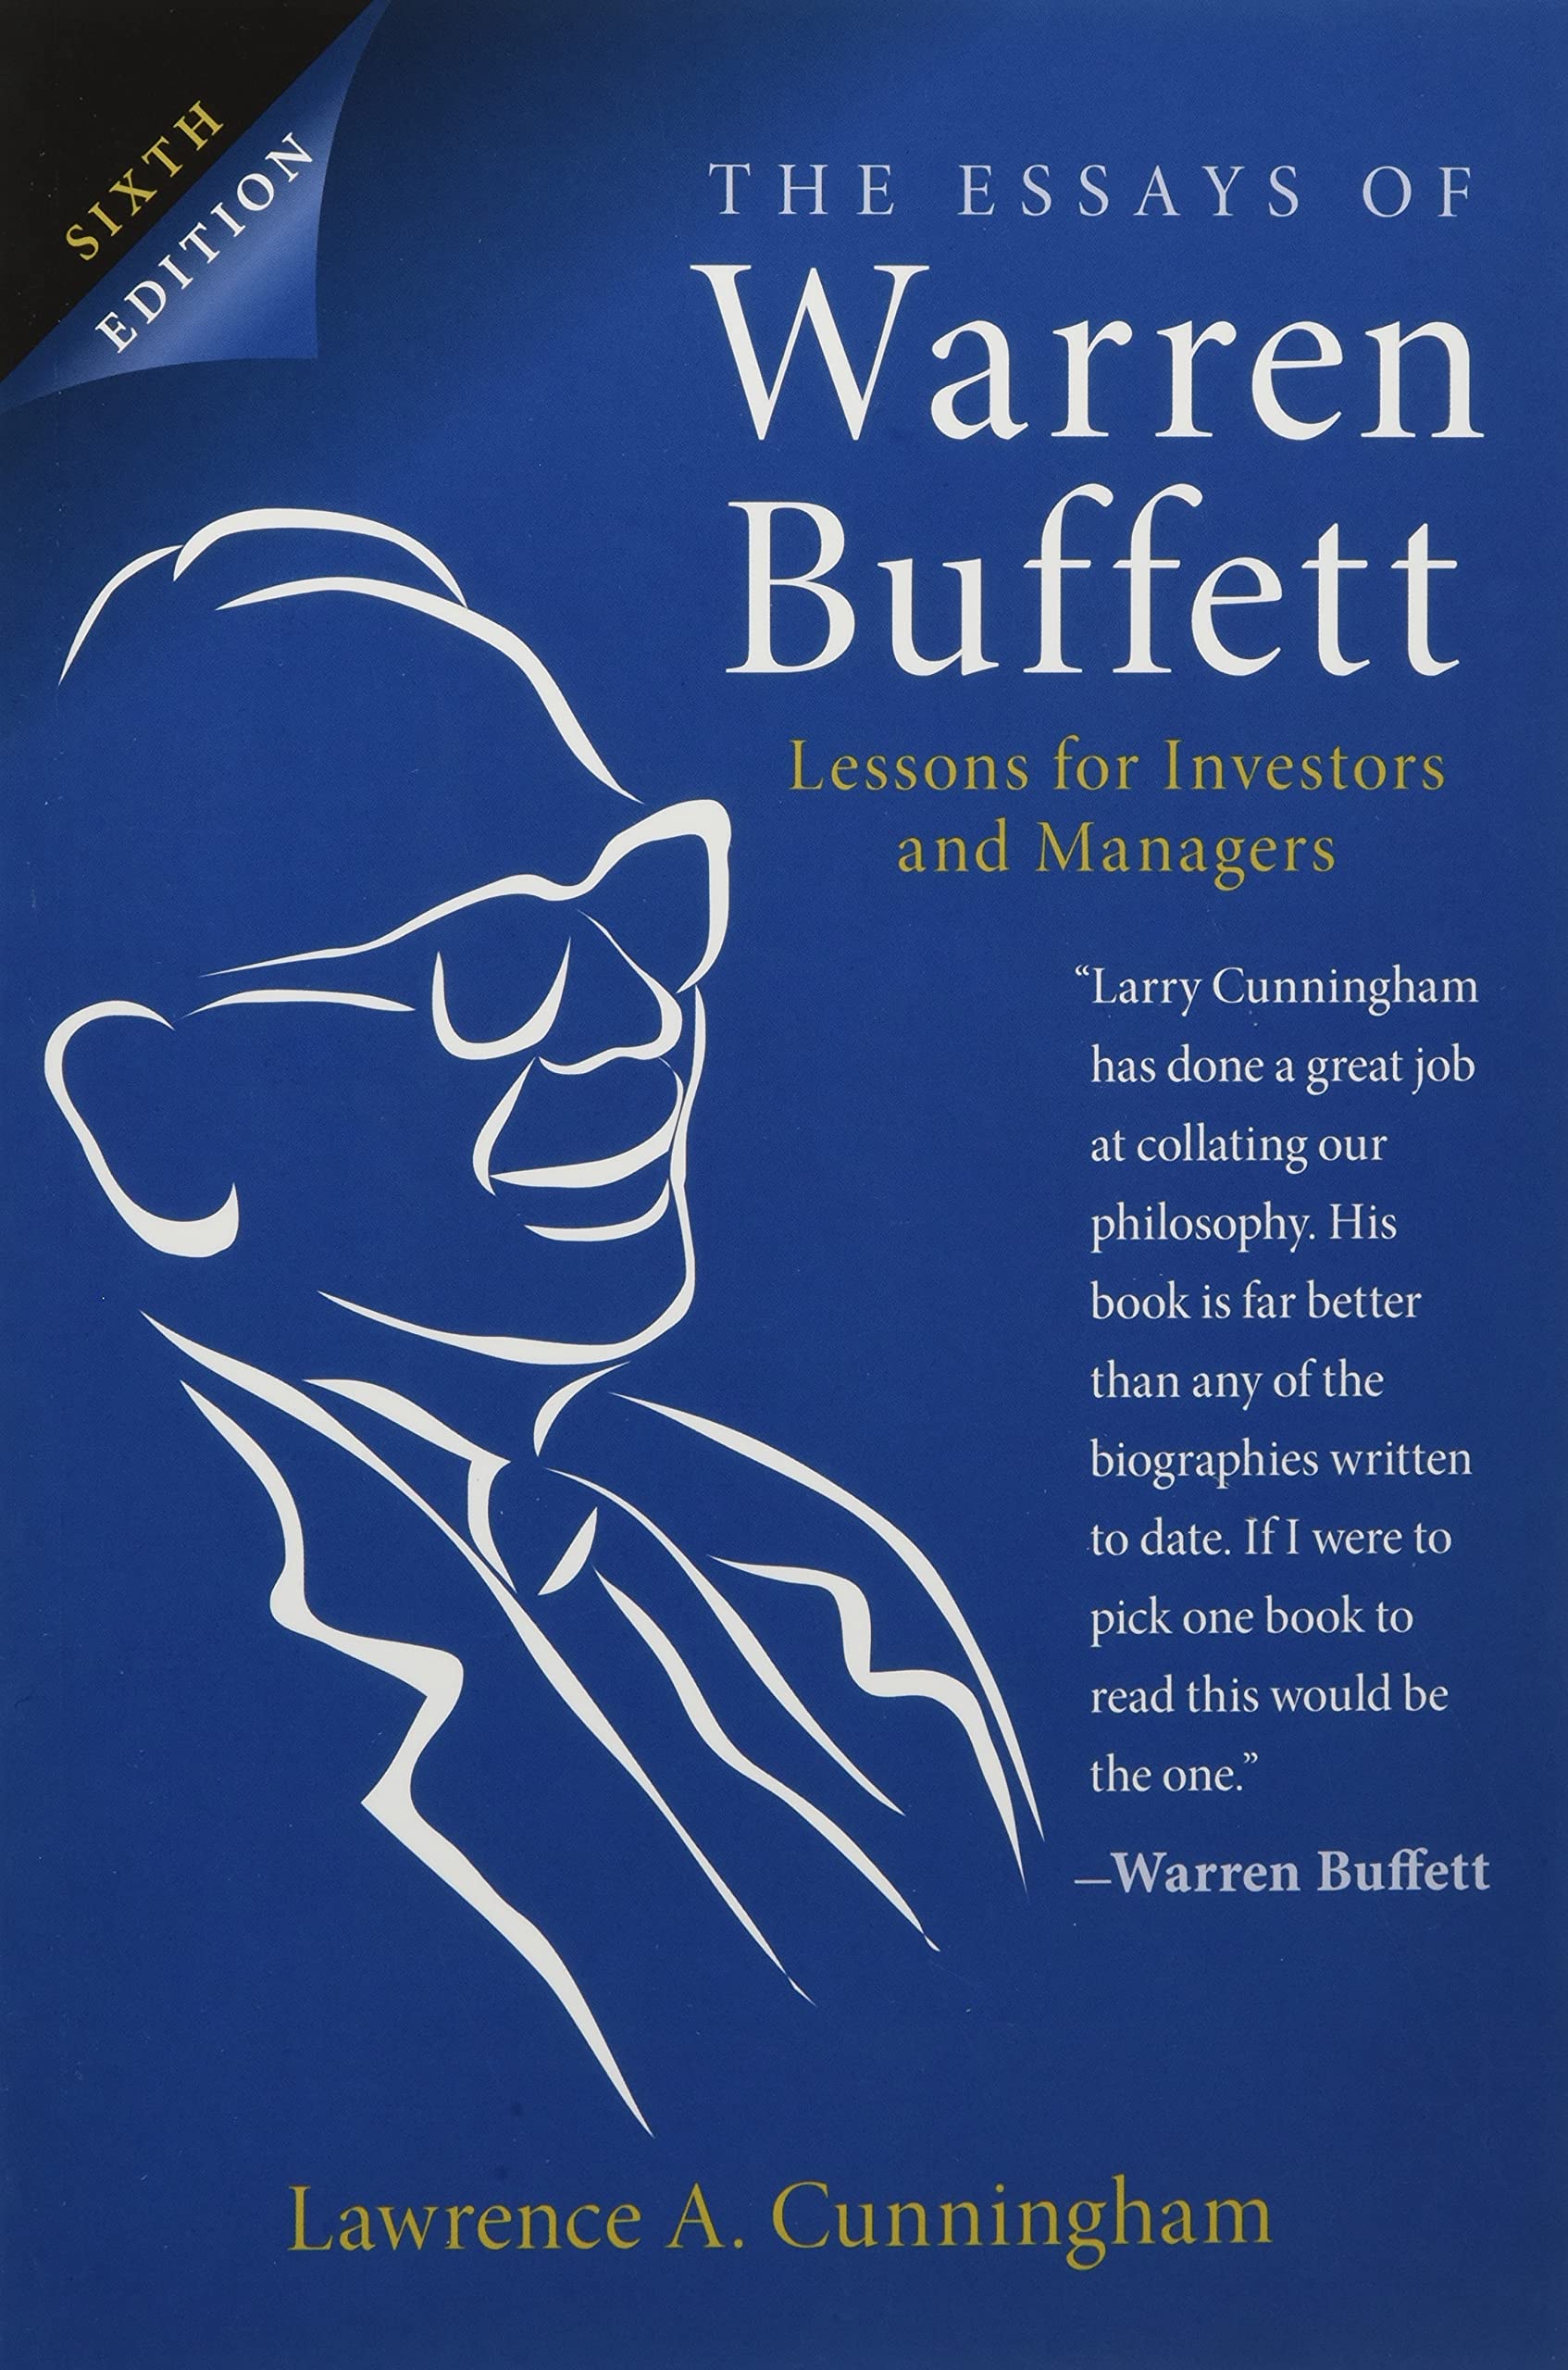 The Essays of Warren Buffett: Lessons for Investors and Managers, 6th Edition